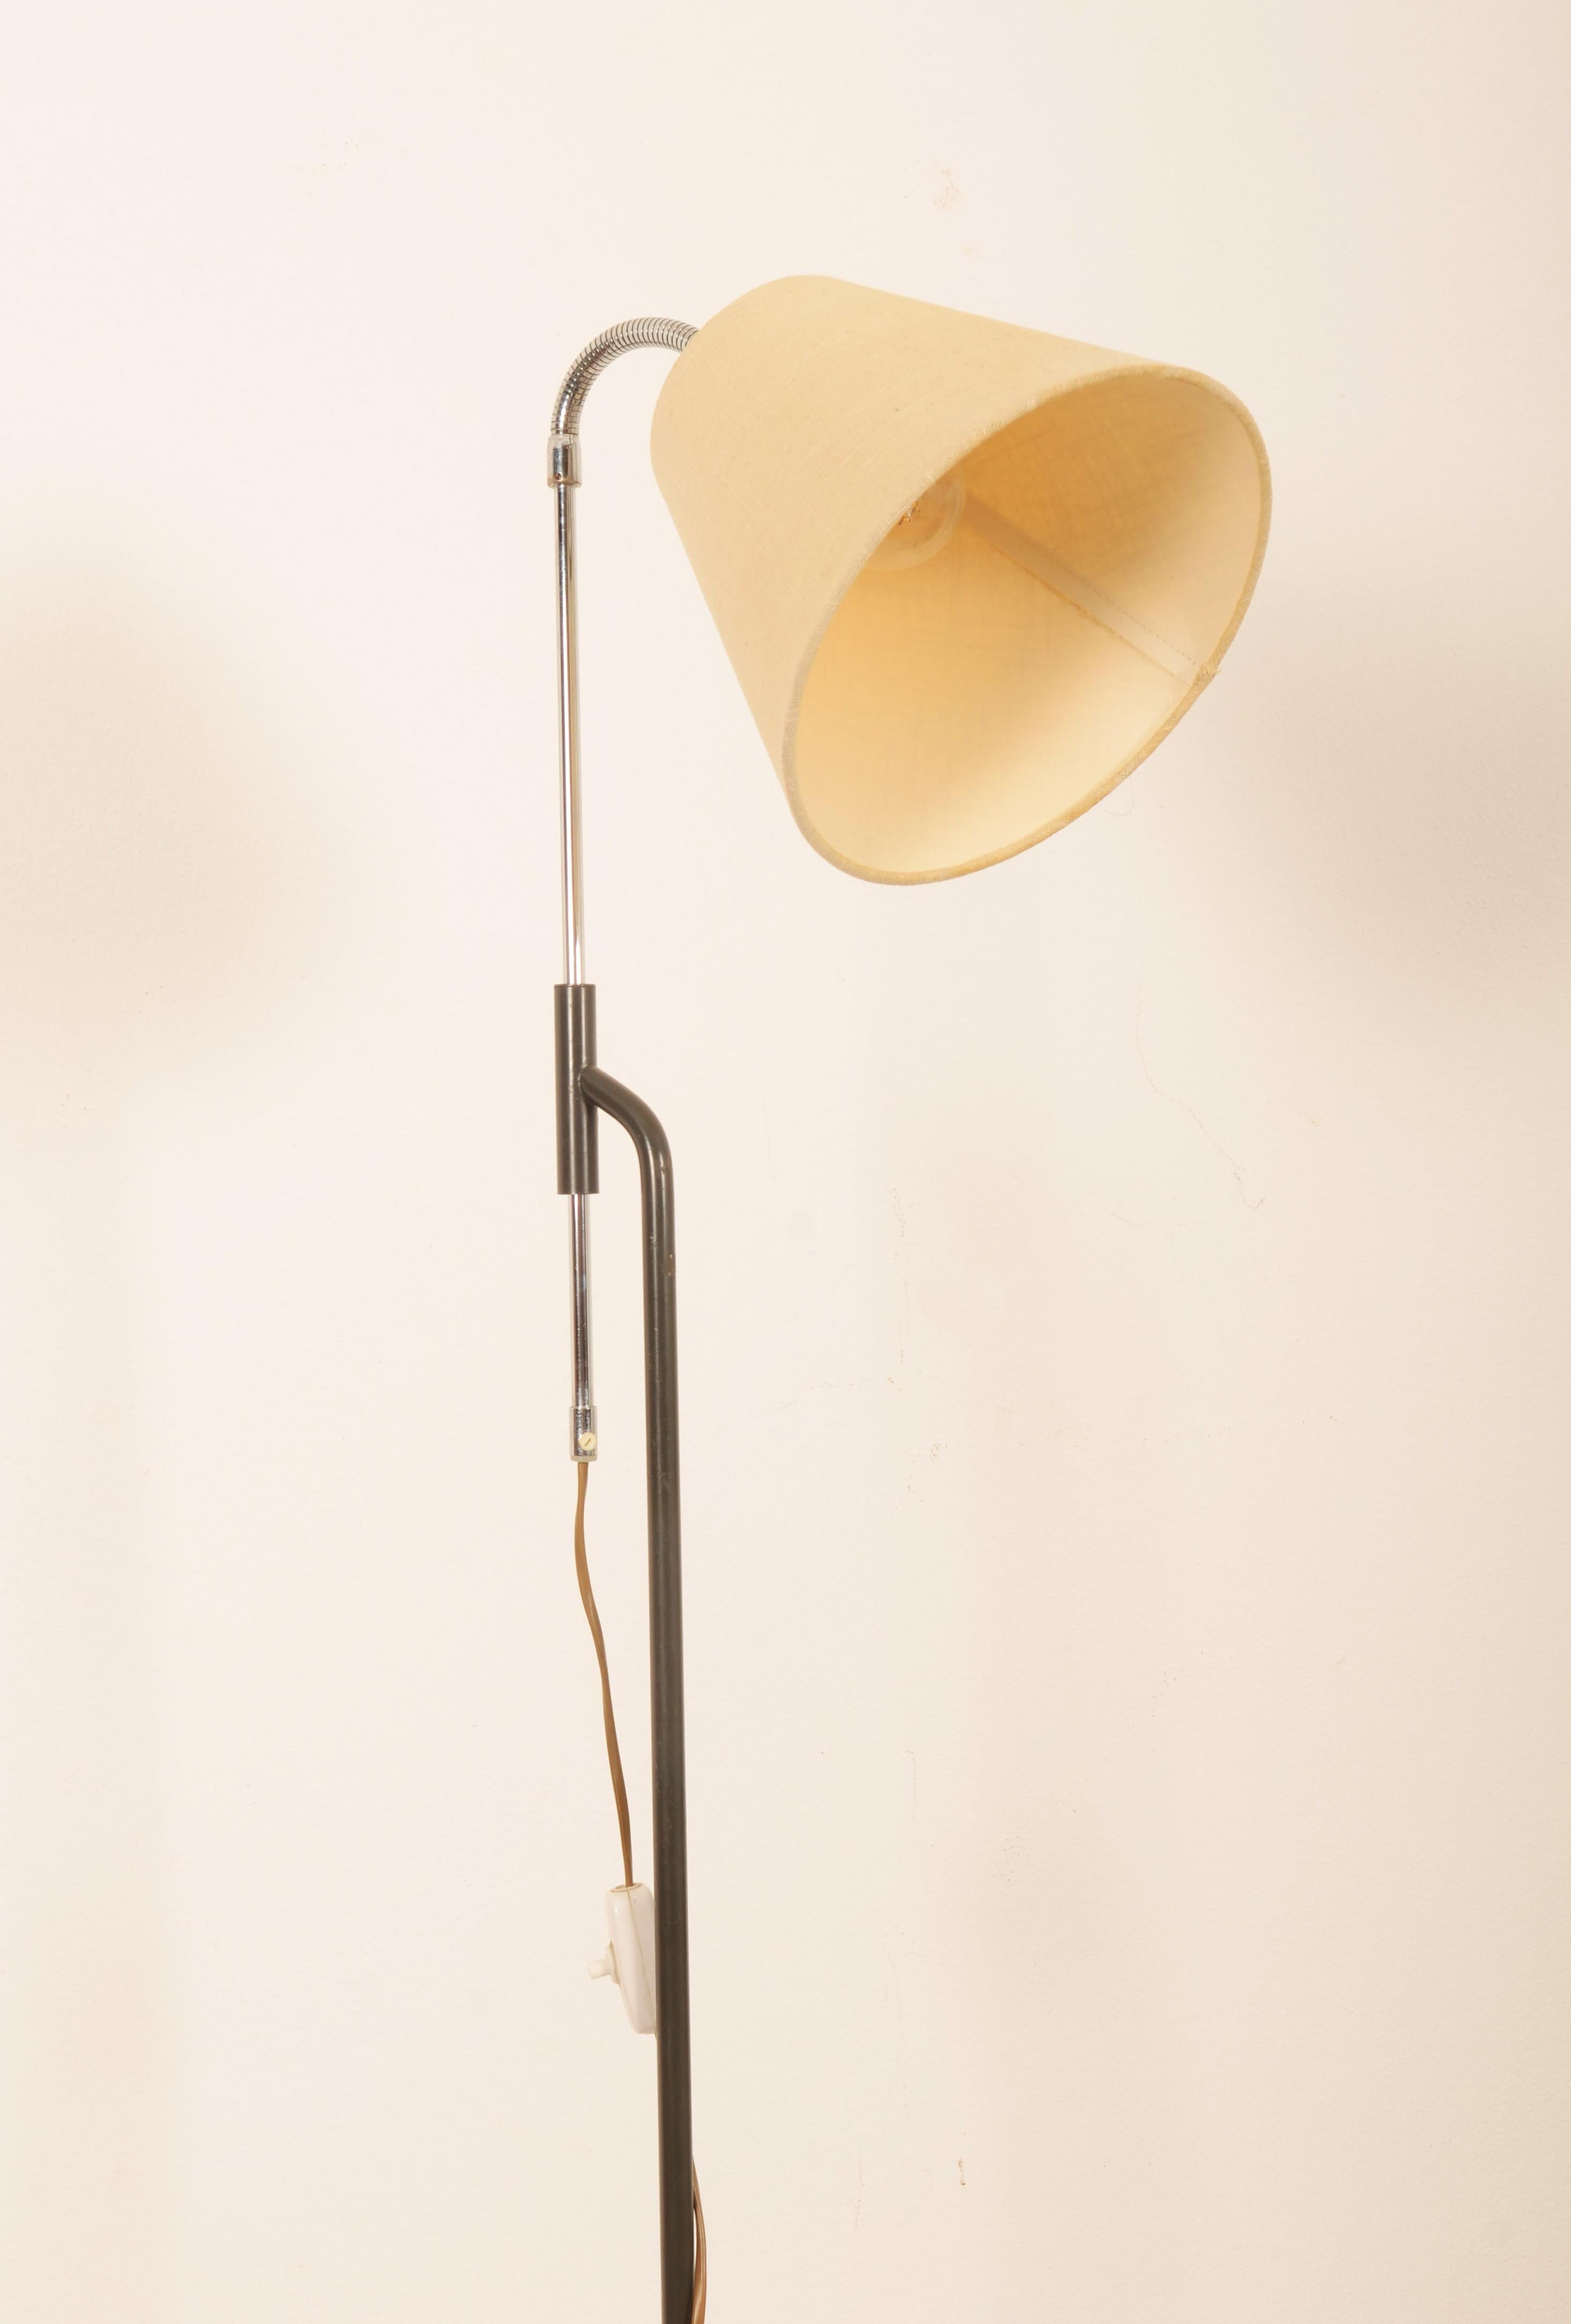 Midcentury Floor Lamp Möllers Armatur Sweden In Good Condition For Sale In Vienna, AT